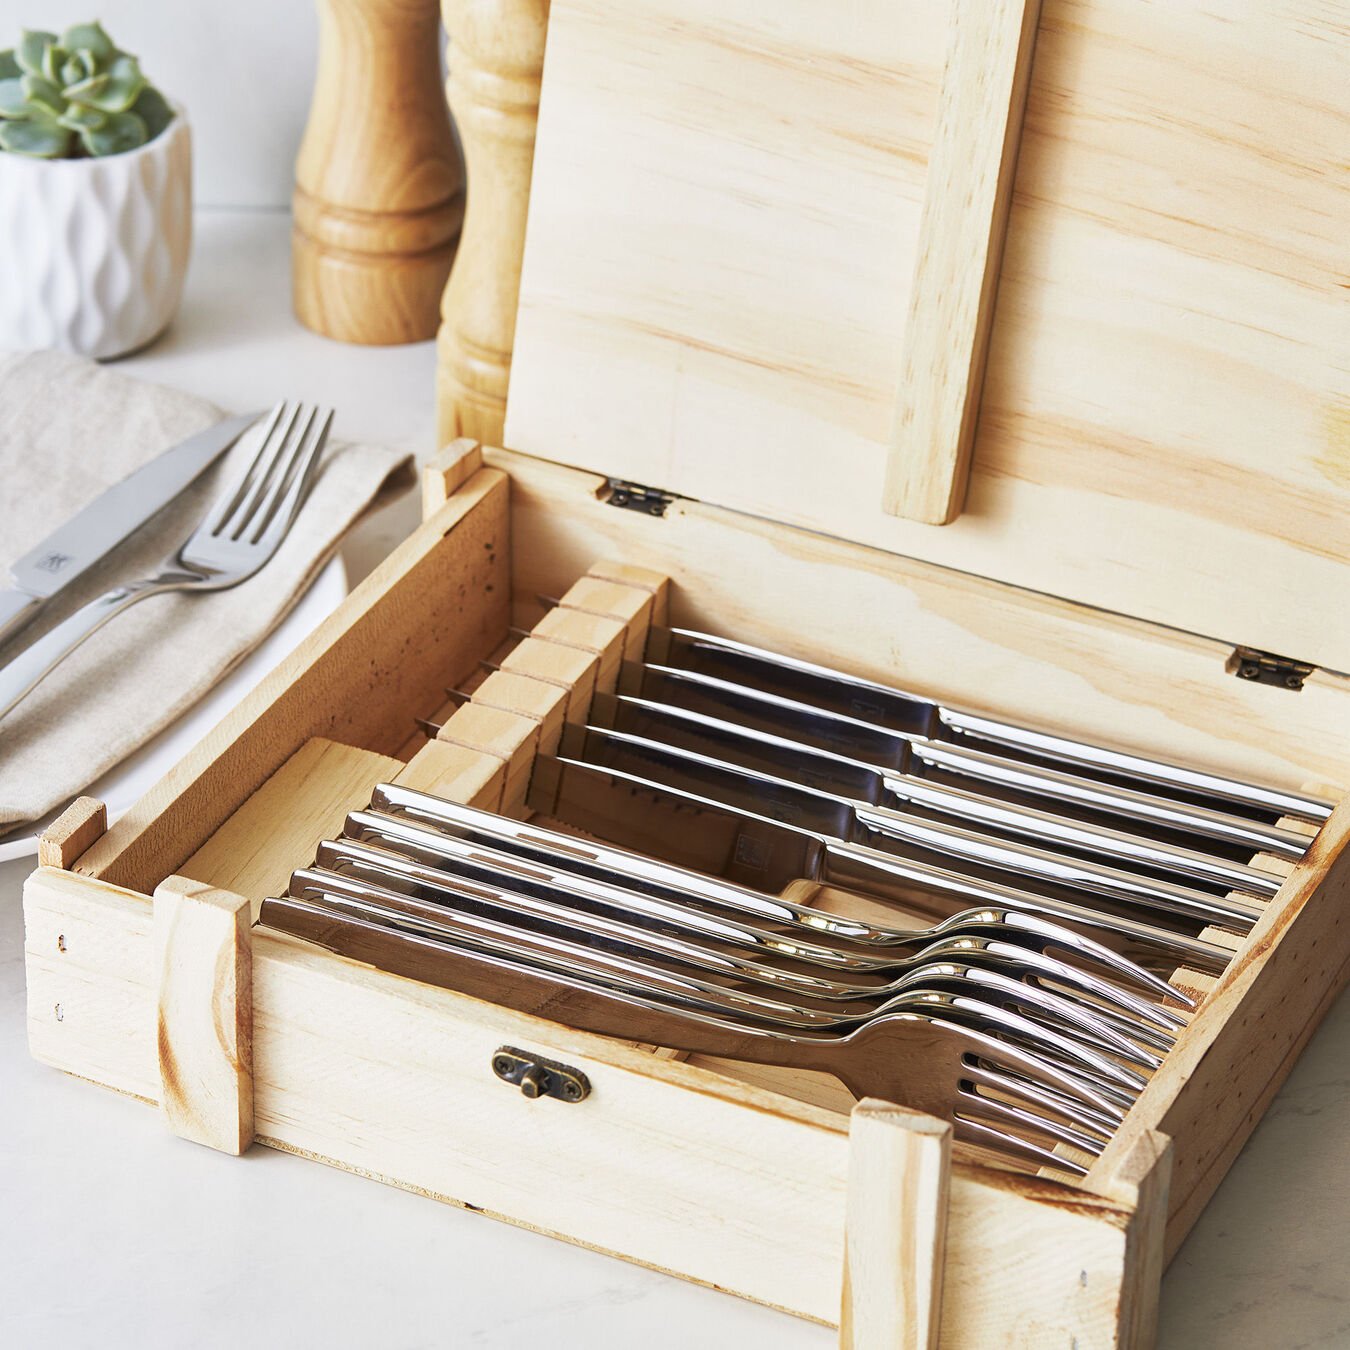 Zwilling 12 Pc Stainless Steel Steak Knife Set in Wood Box | | Cozymeal